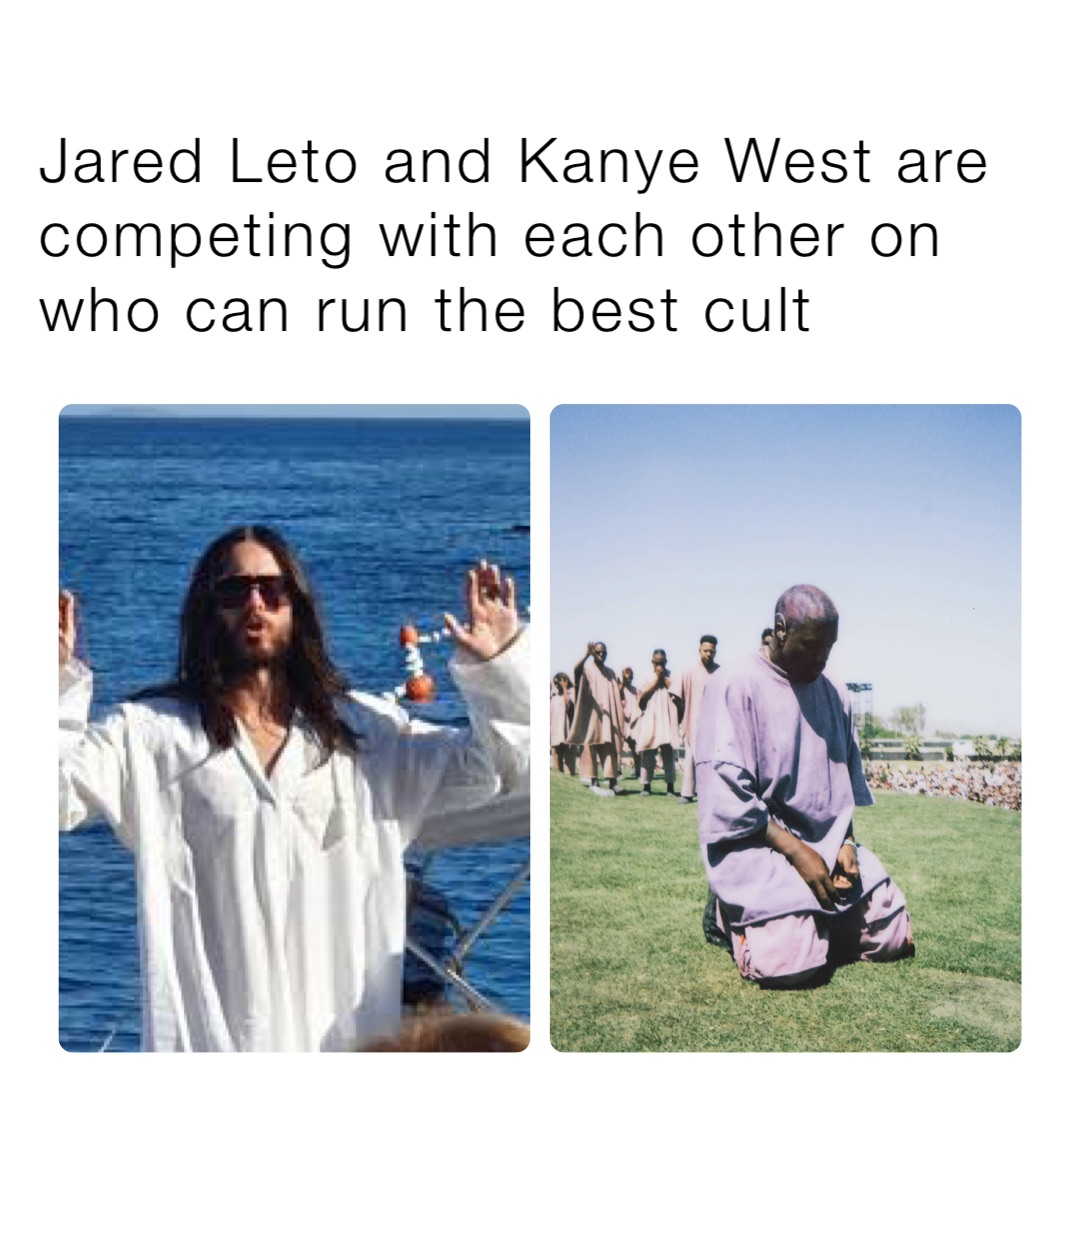 Jared Leto and Kanye West are competing with each other on who can run the best cult